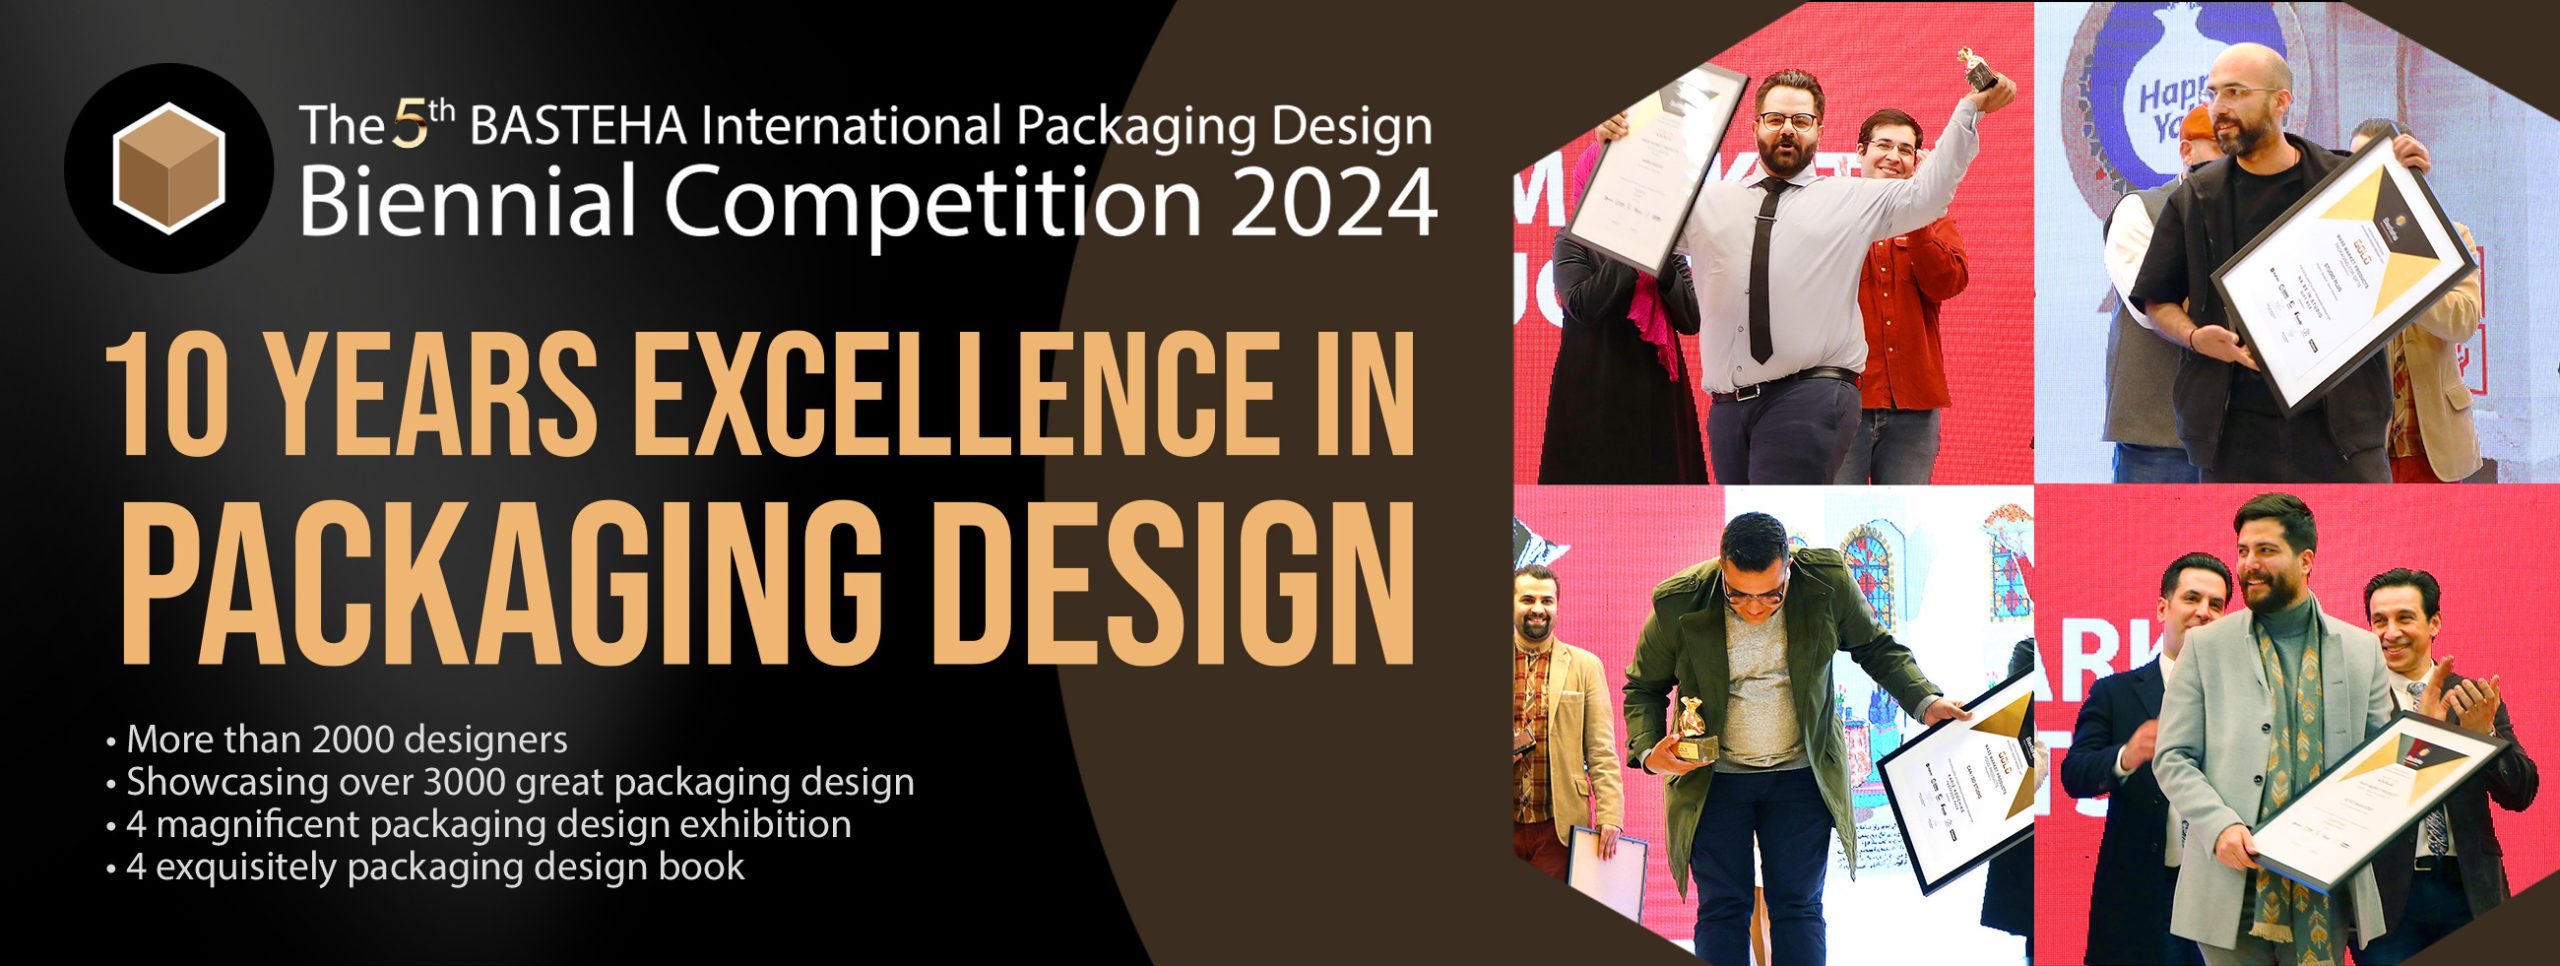 10-years-excellence-in-packaging-design